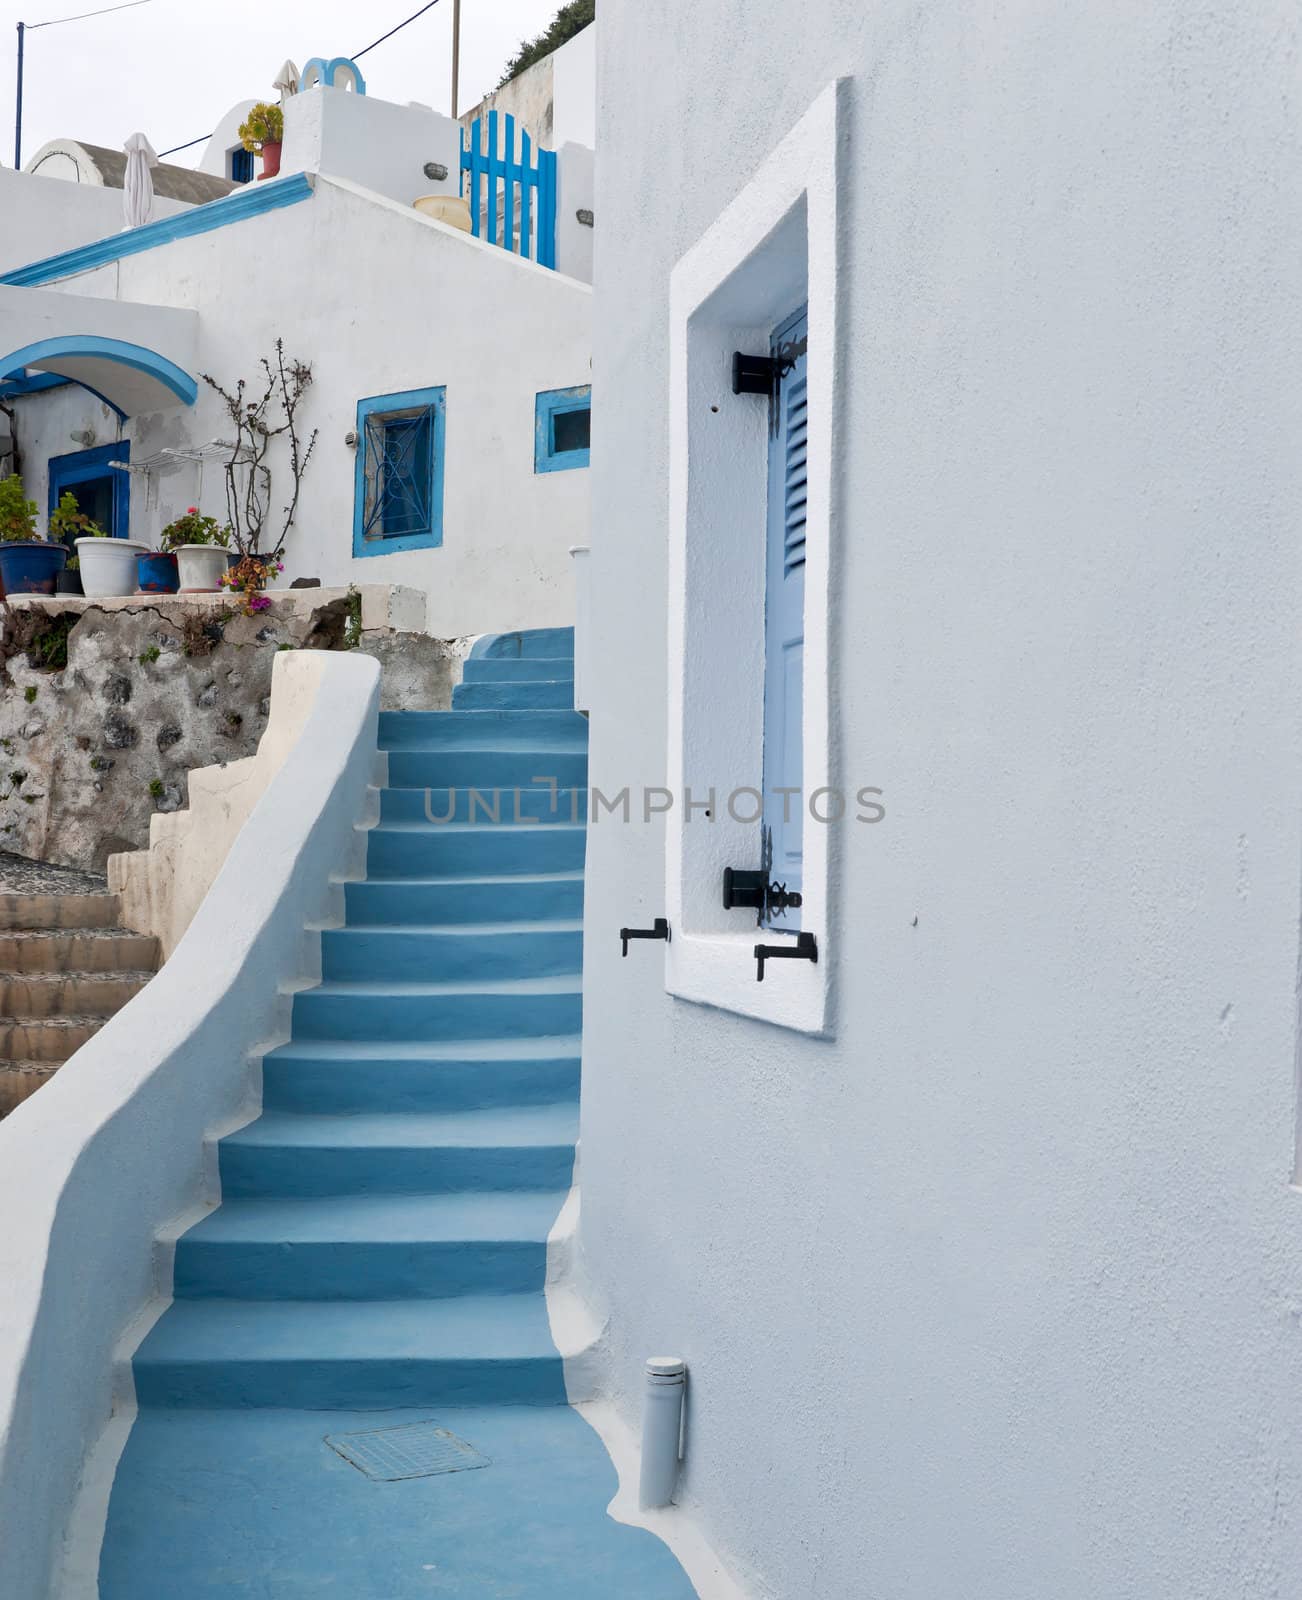 White buildings and blue staircase in Imerovigli village